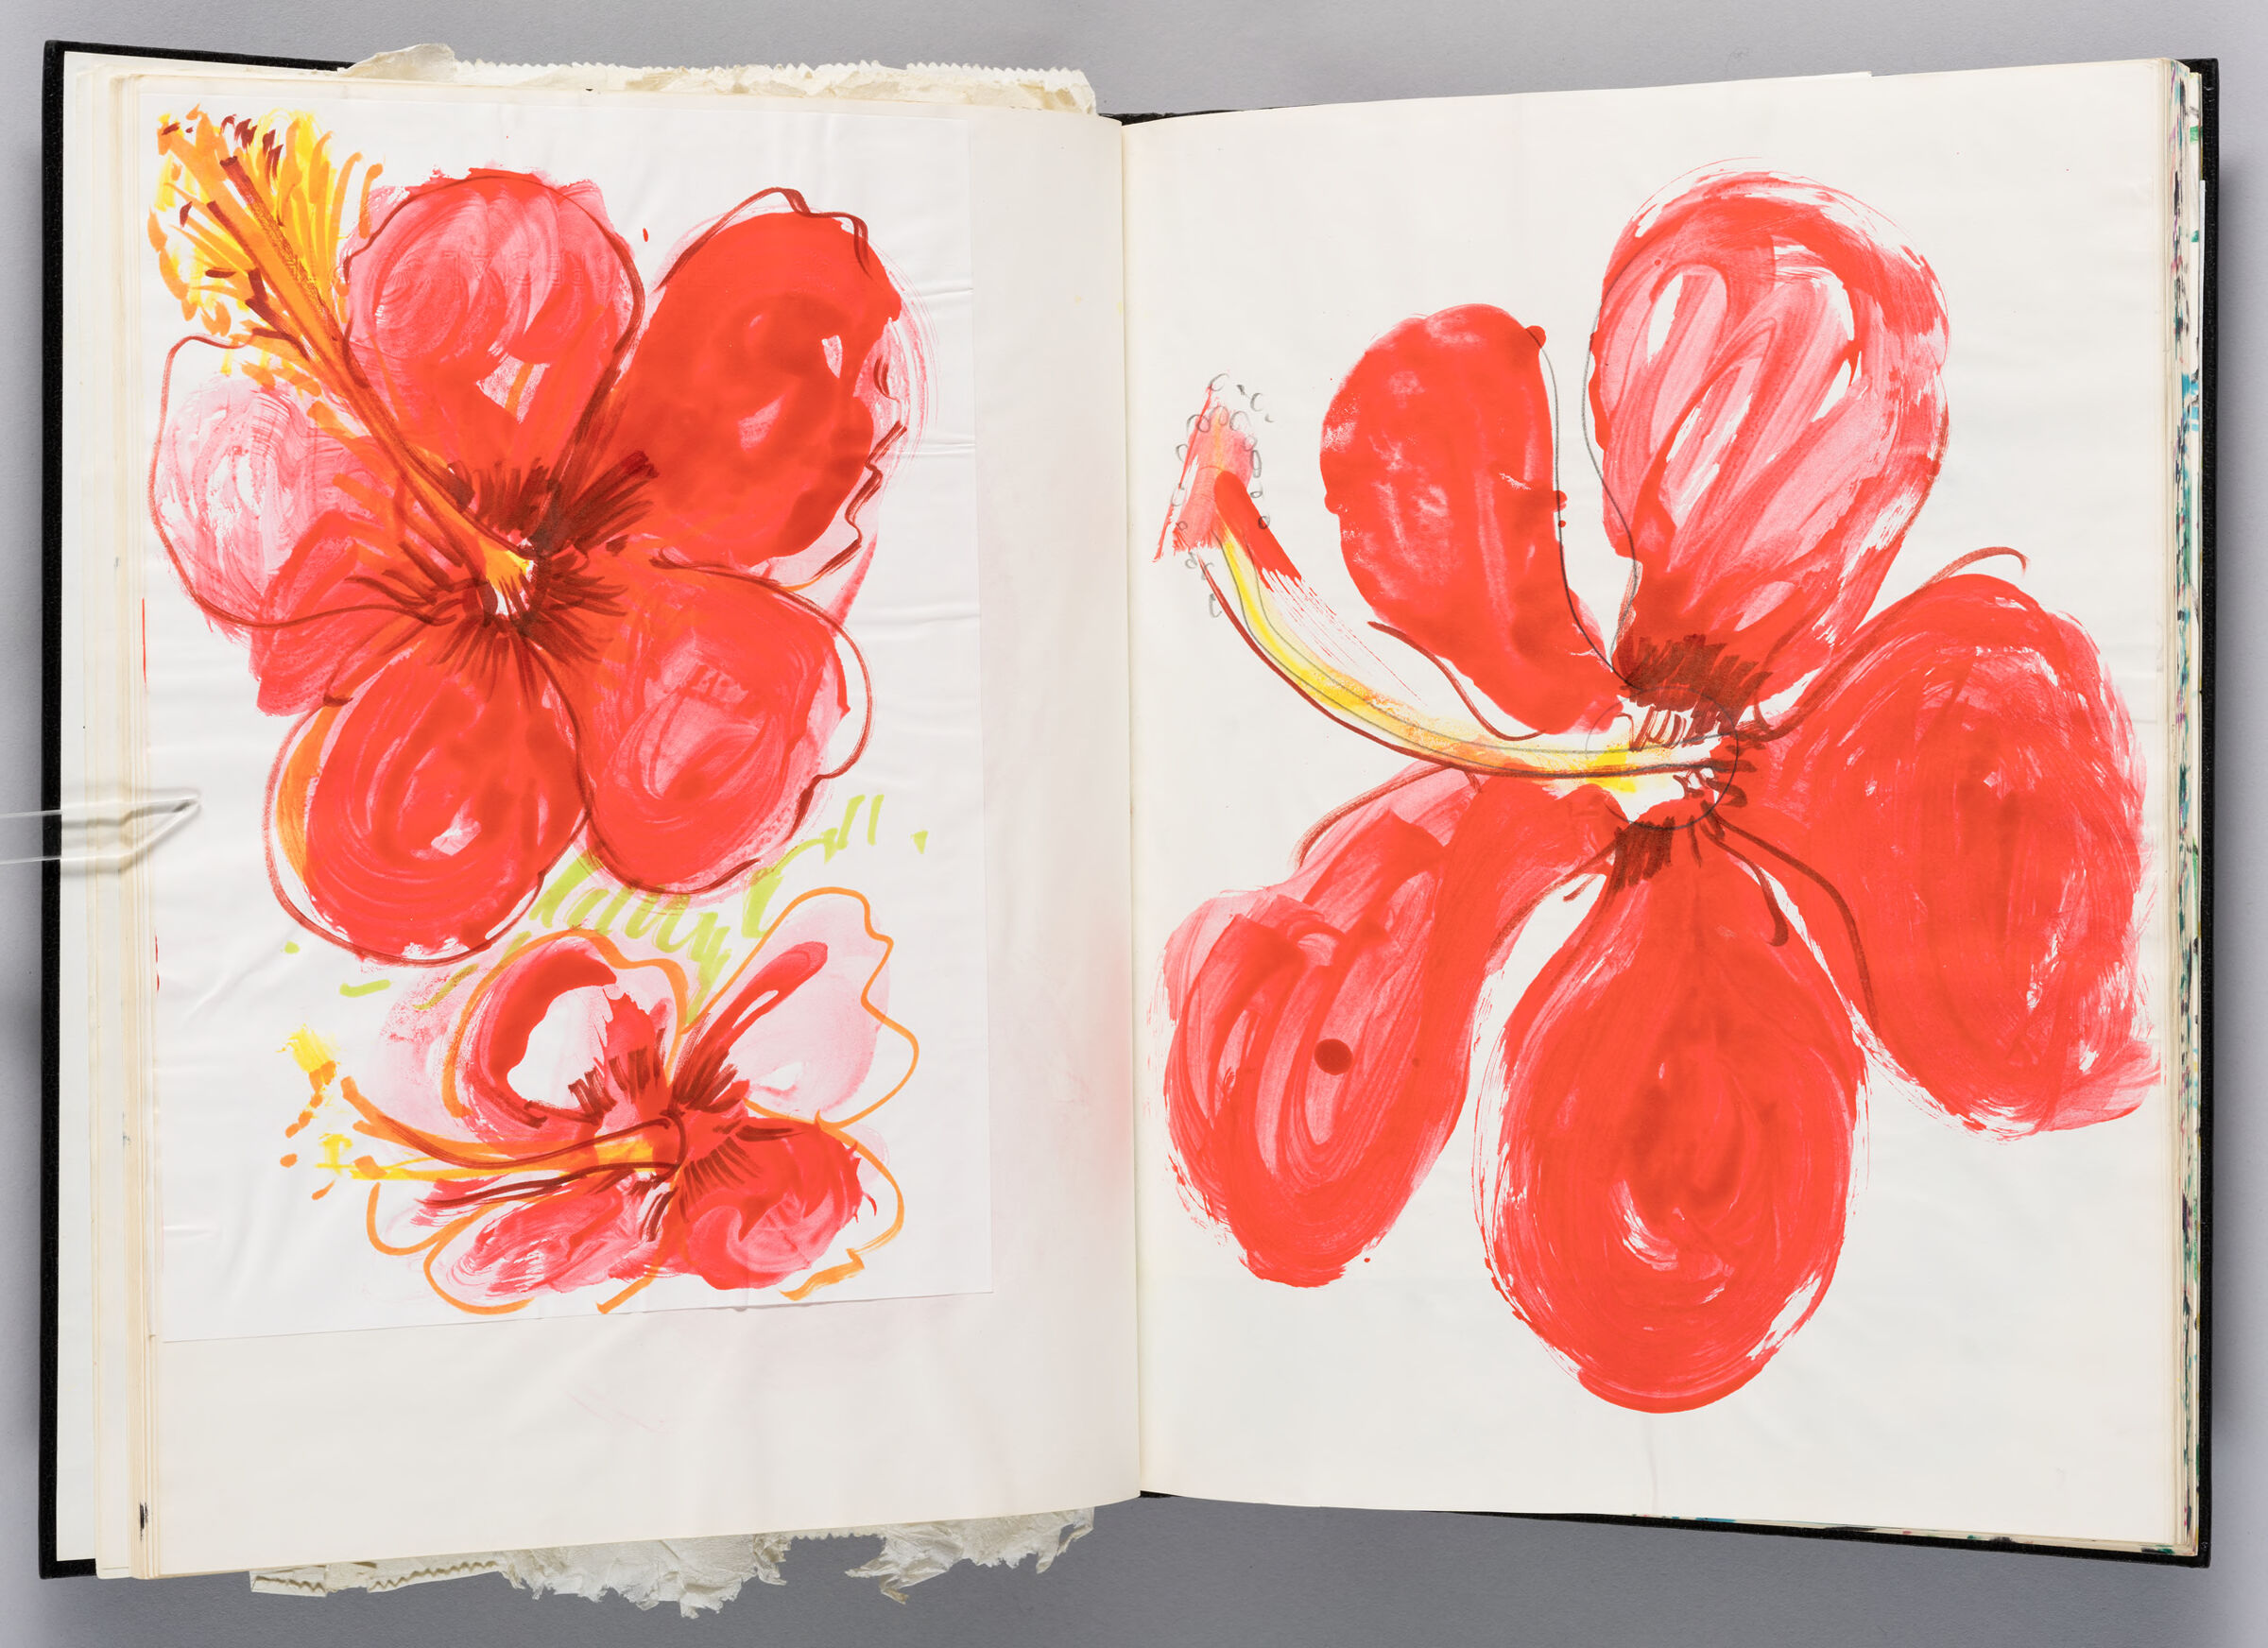 Untitled (Adhered Sketch Of Hibiscus Flowers, Left Page); Untitled (Hibiscus Flower, Right Page)